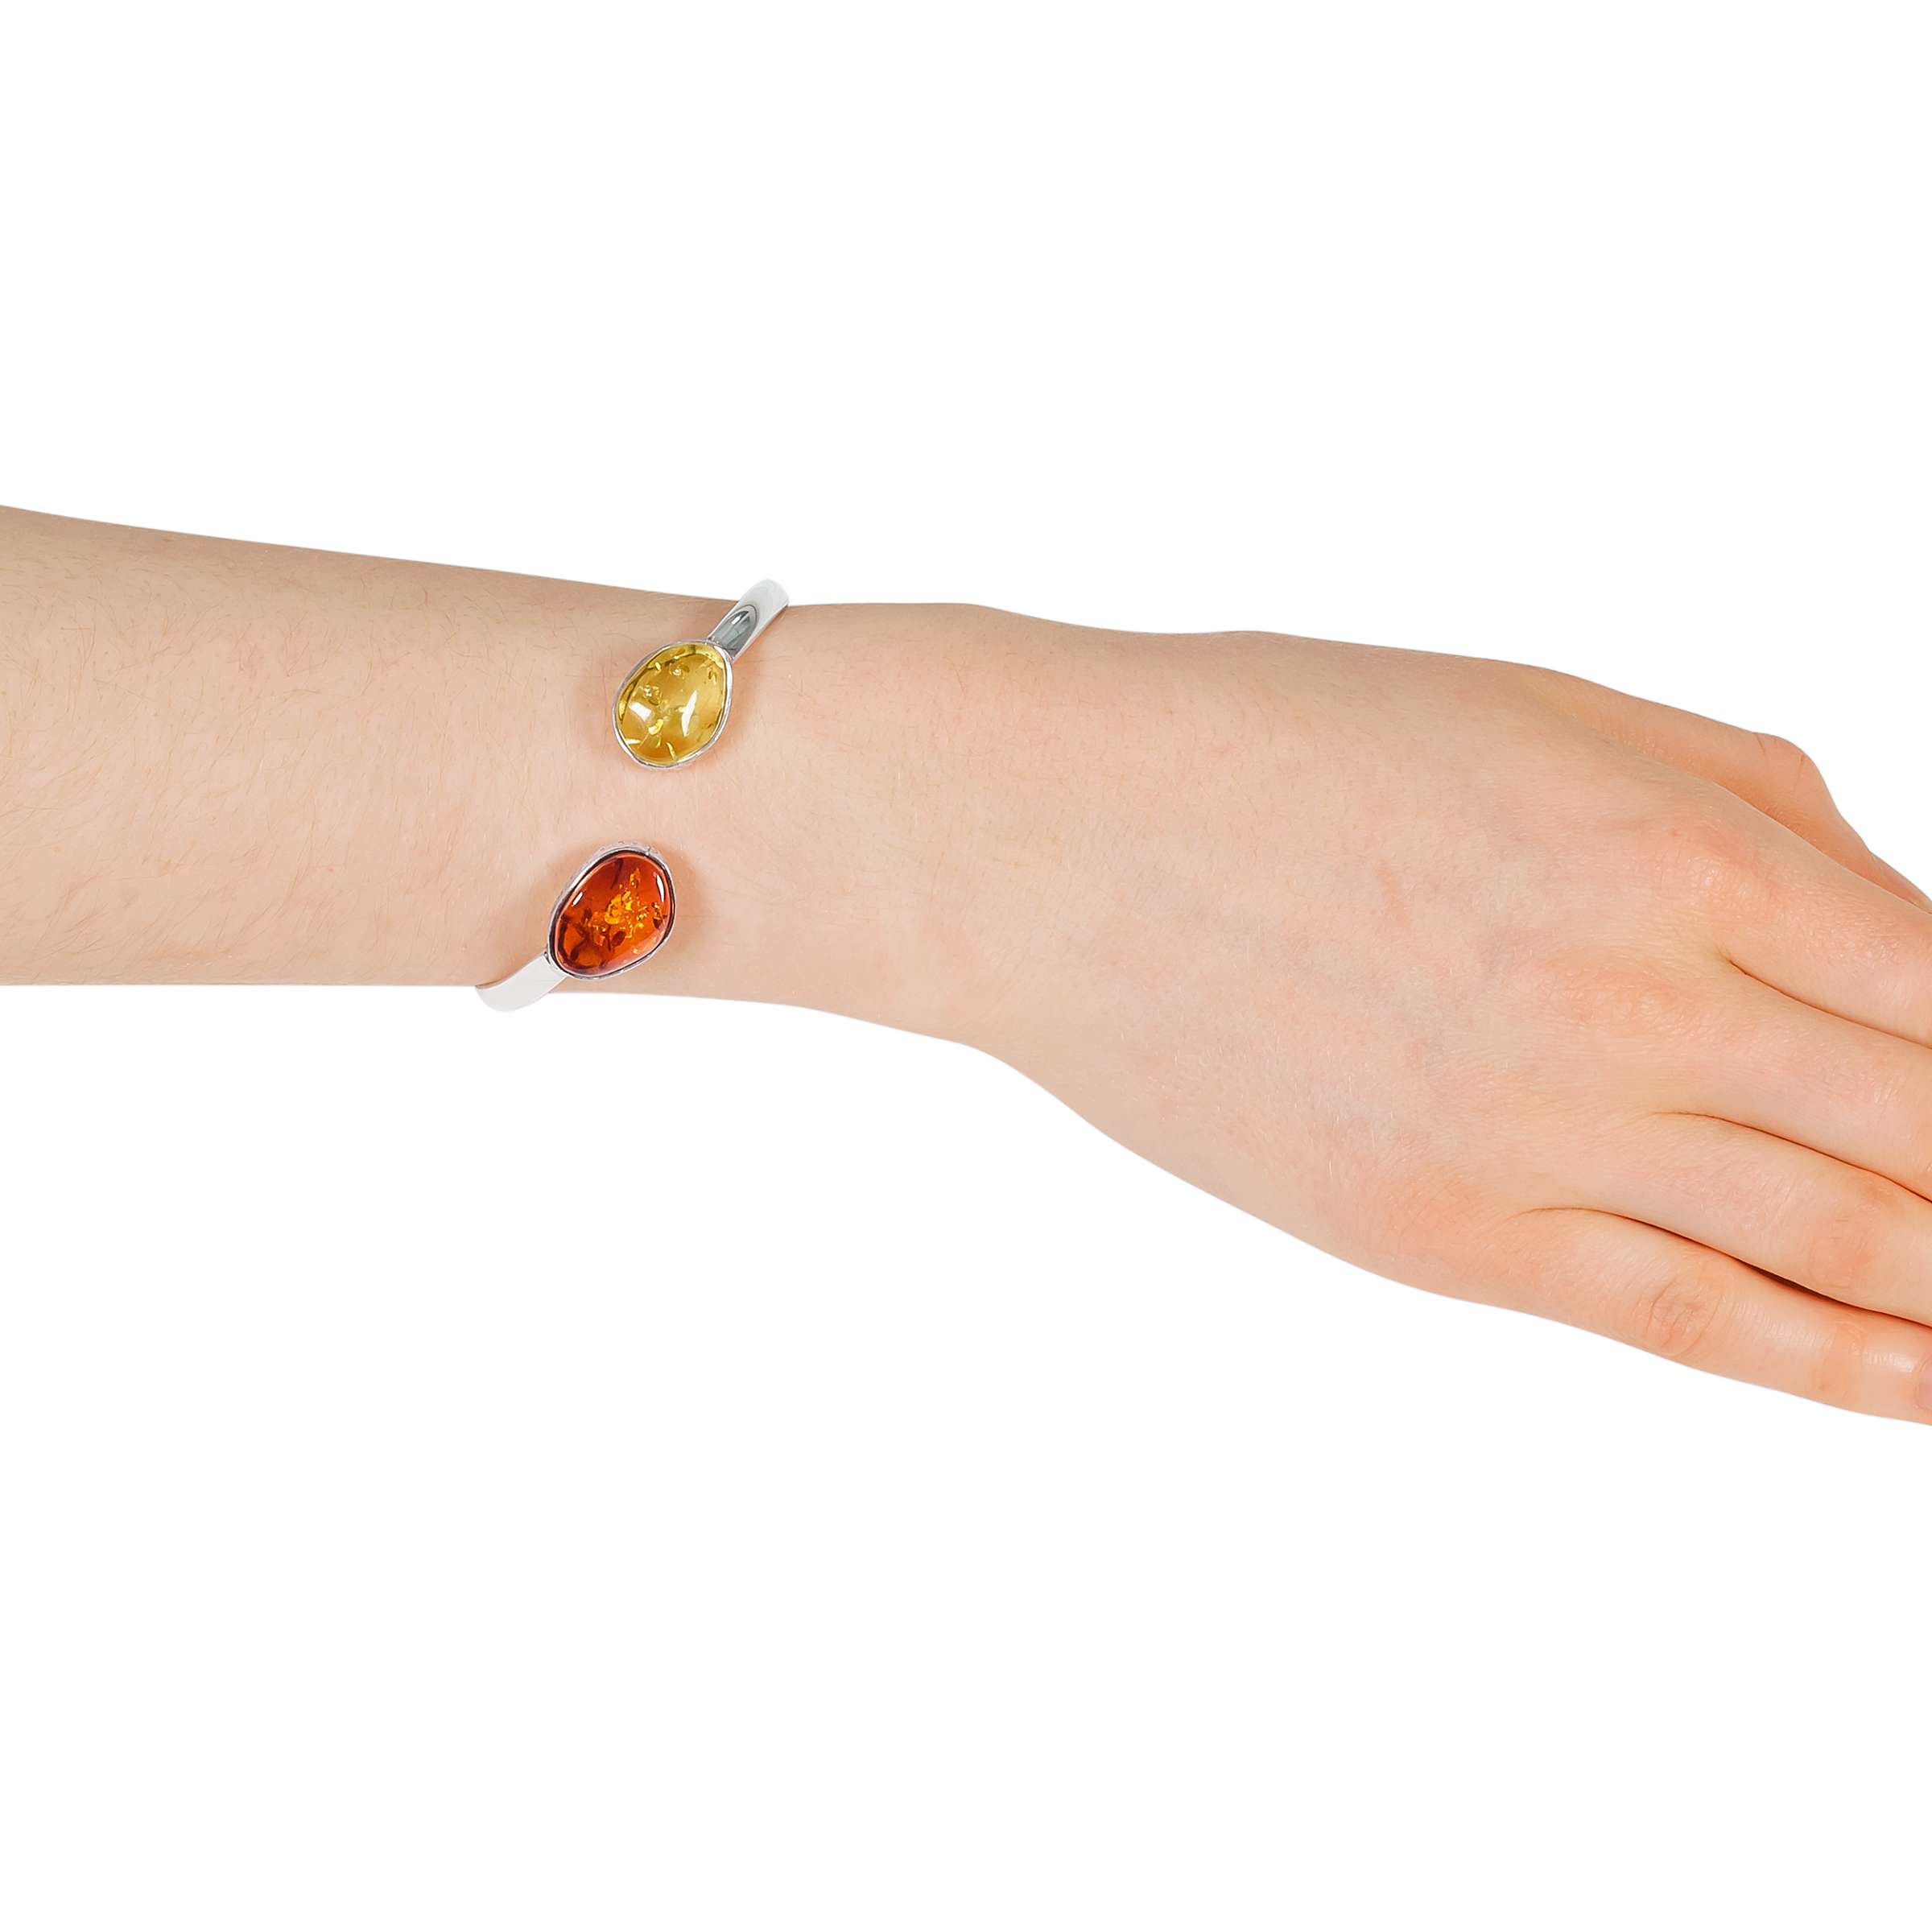 Buy Be-Jewelled Sterling Silver Baltic Amber Cuff, Amber Online at johnlewis.com